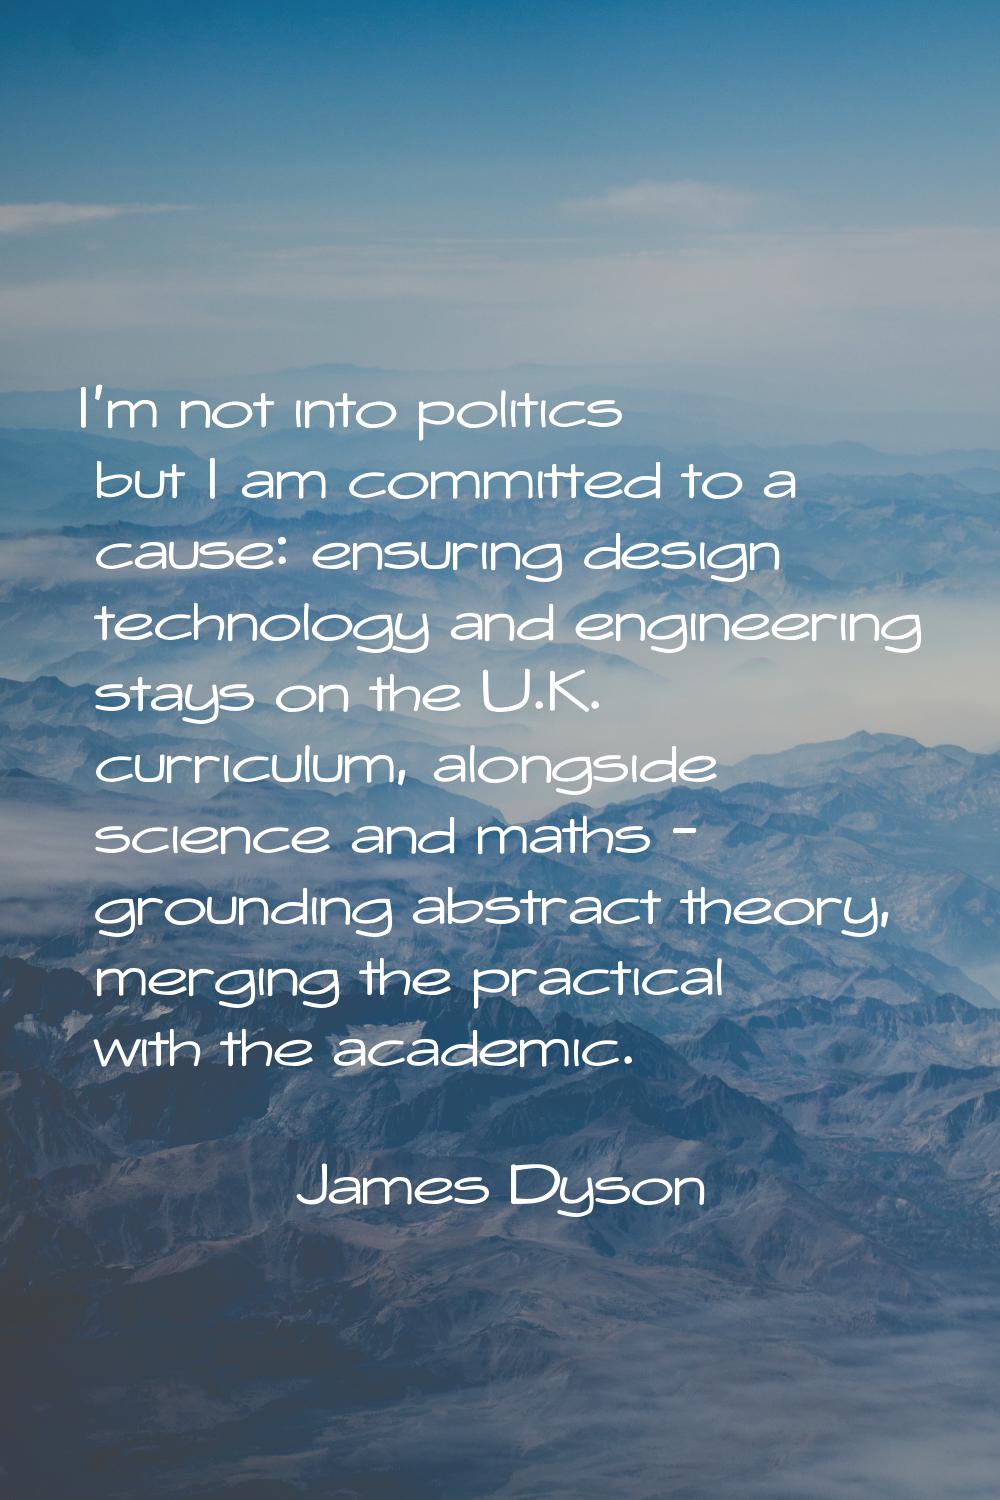 I'm not into politics but I am committed to a cause: ensuring design technology and engineering sta